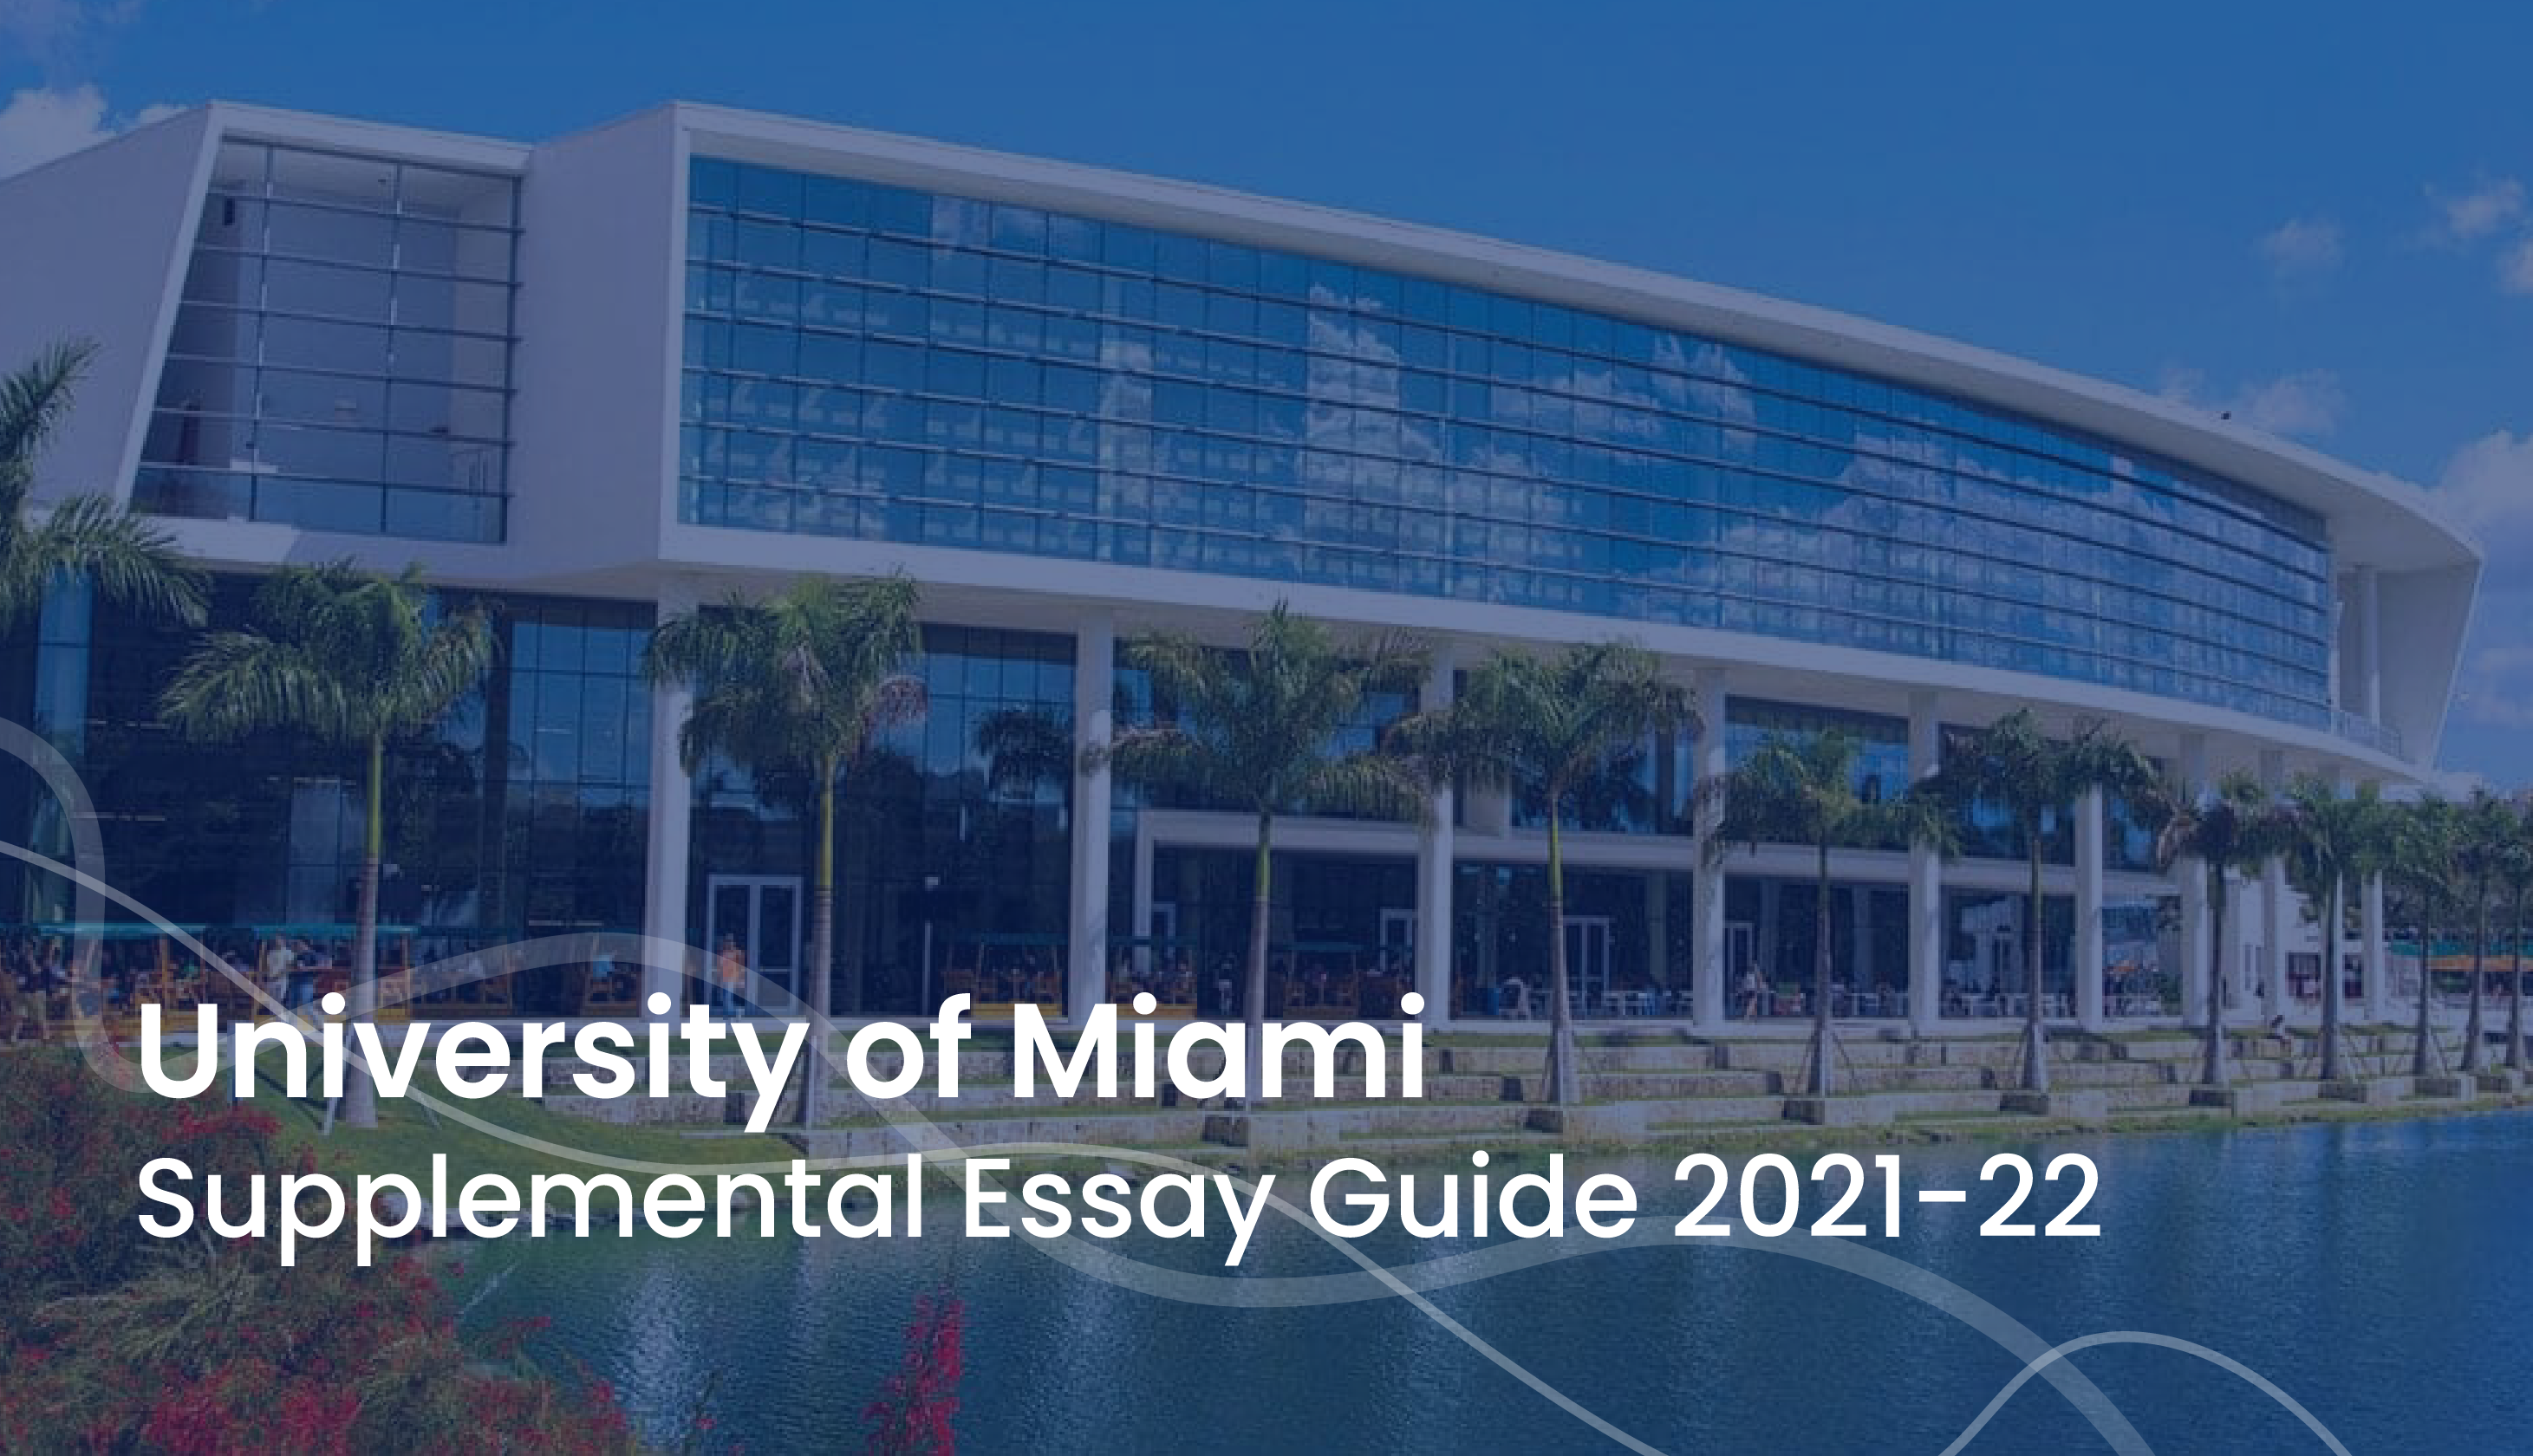 does the university of miami require an essay